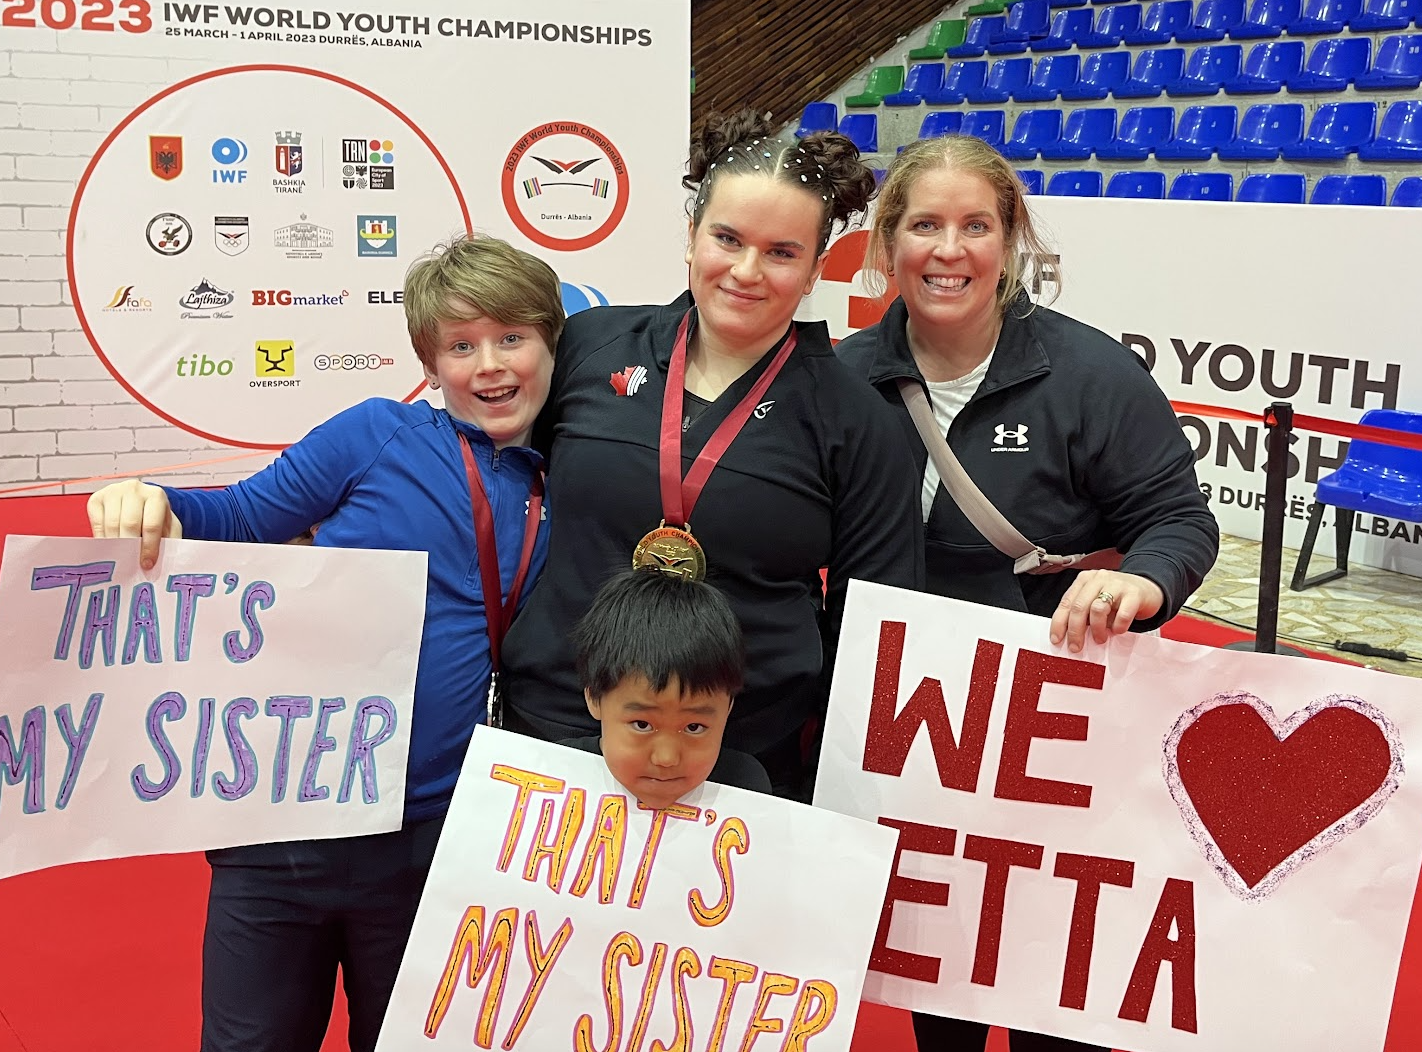 Emma Love, centre, carried on Canada's impressive showing at the IWF World Youth Championships in Durres with a silver medal in the women's 81kg ©ITG